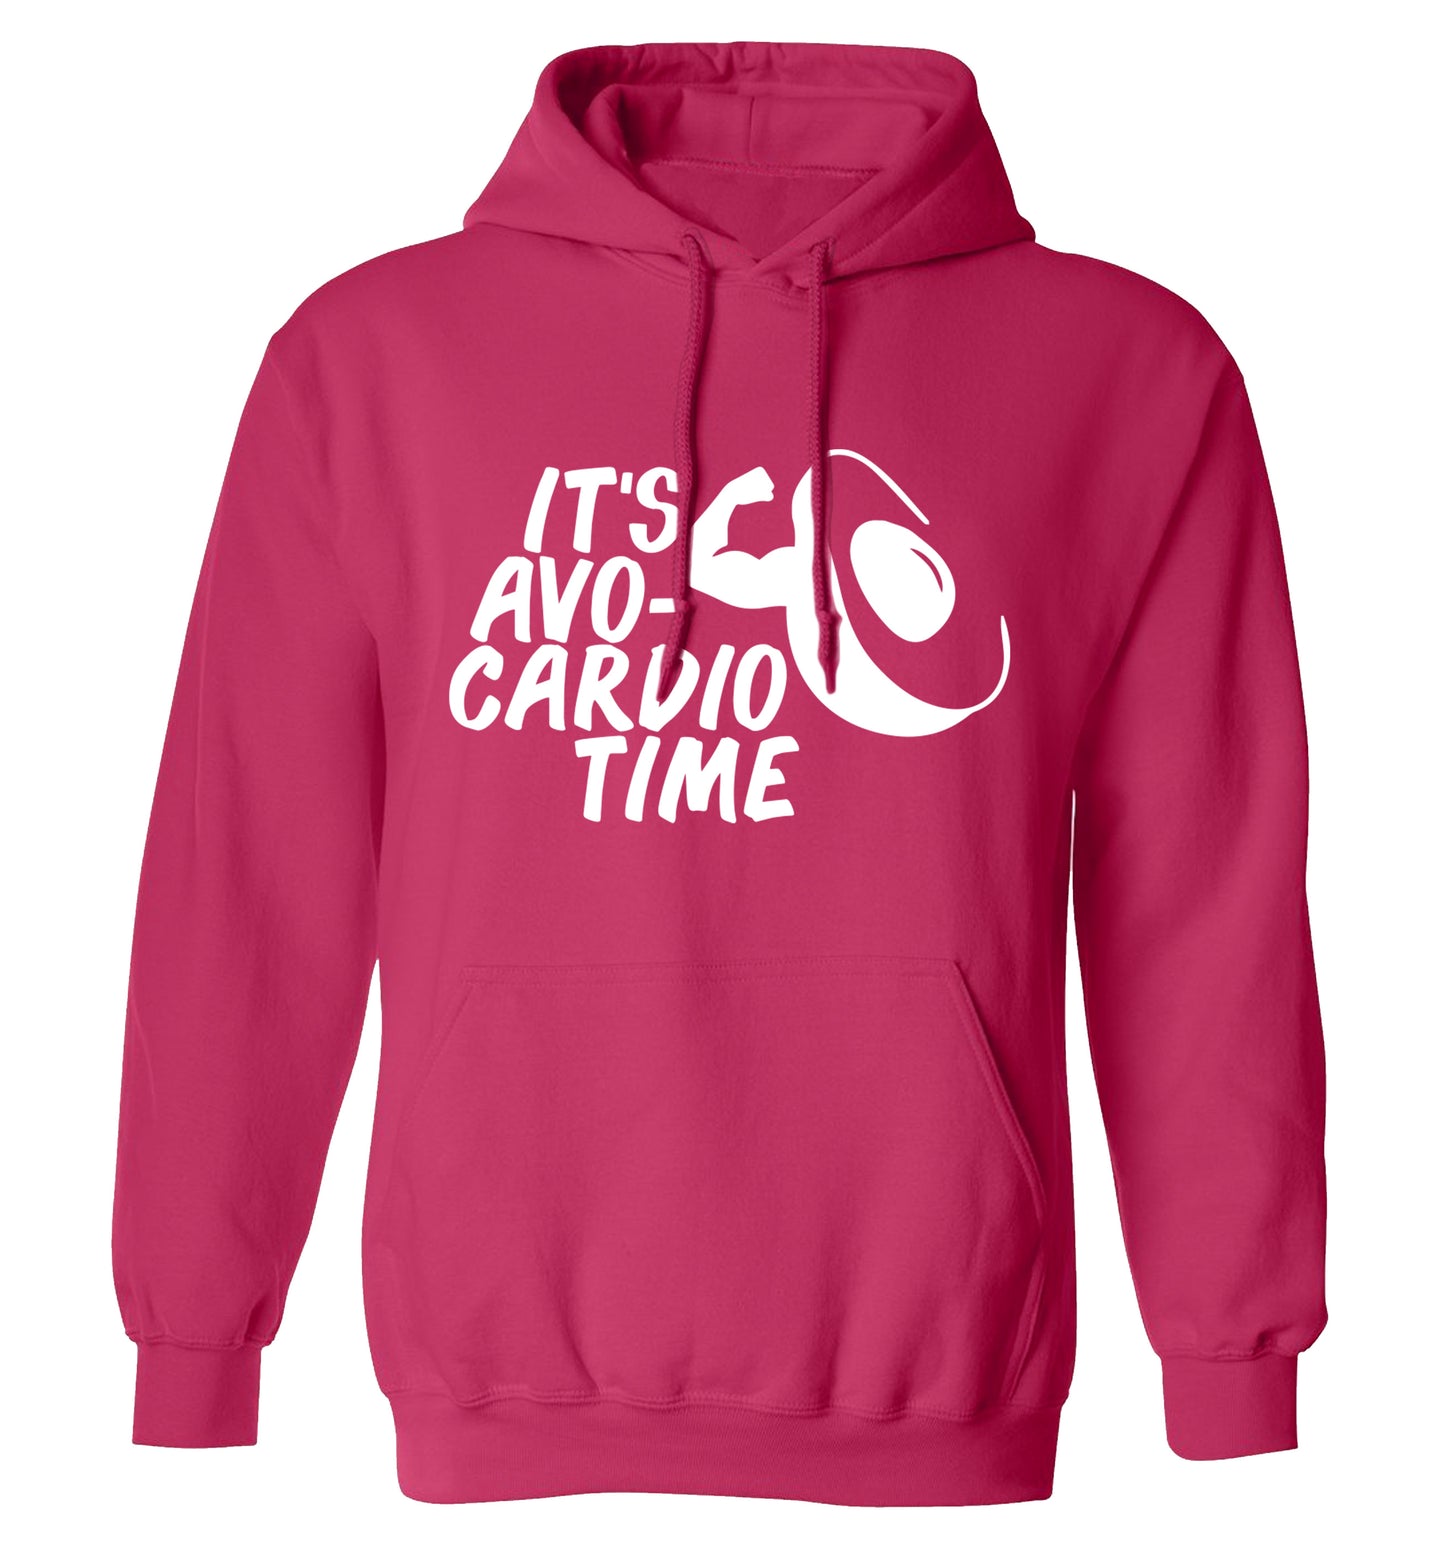 It's avo-cardio time adults unisex pink hoodie 2XL